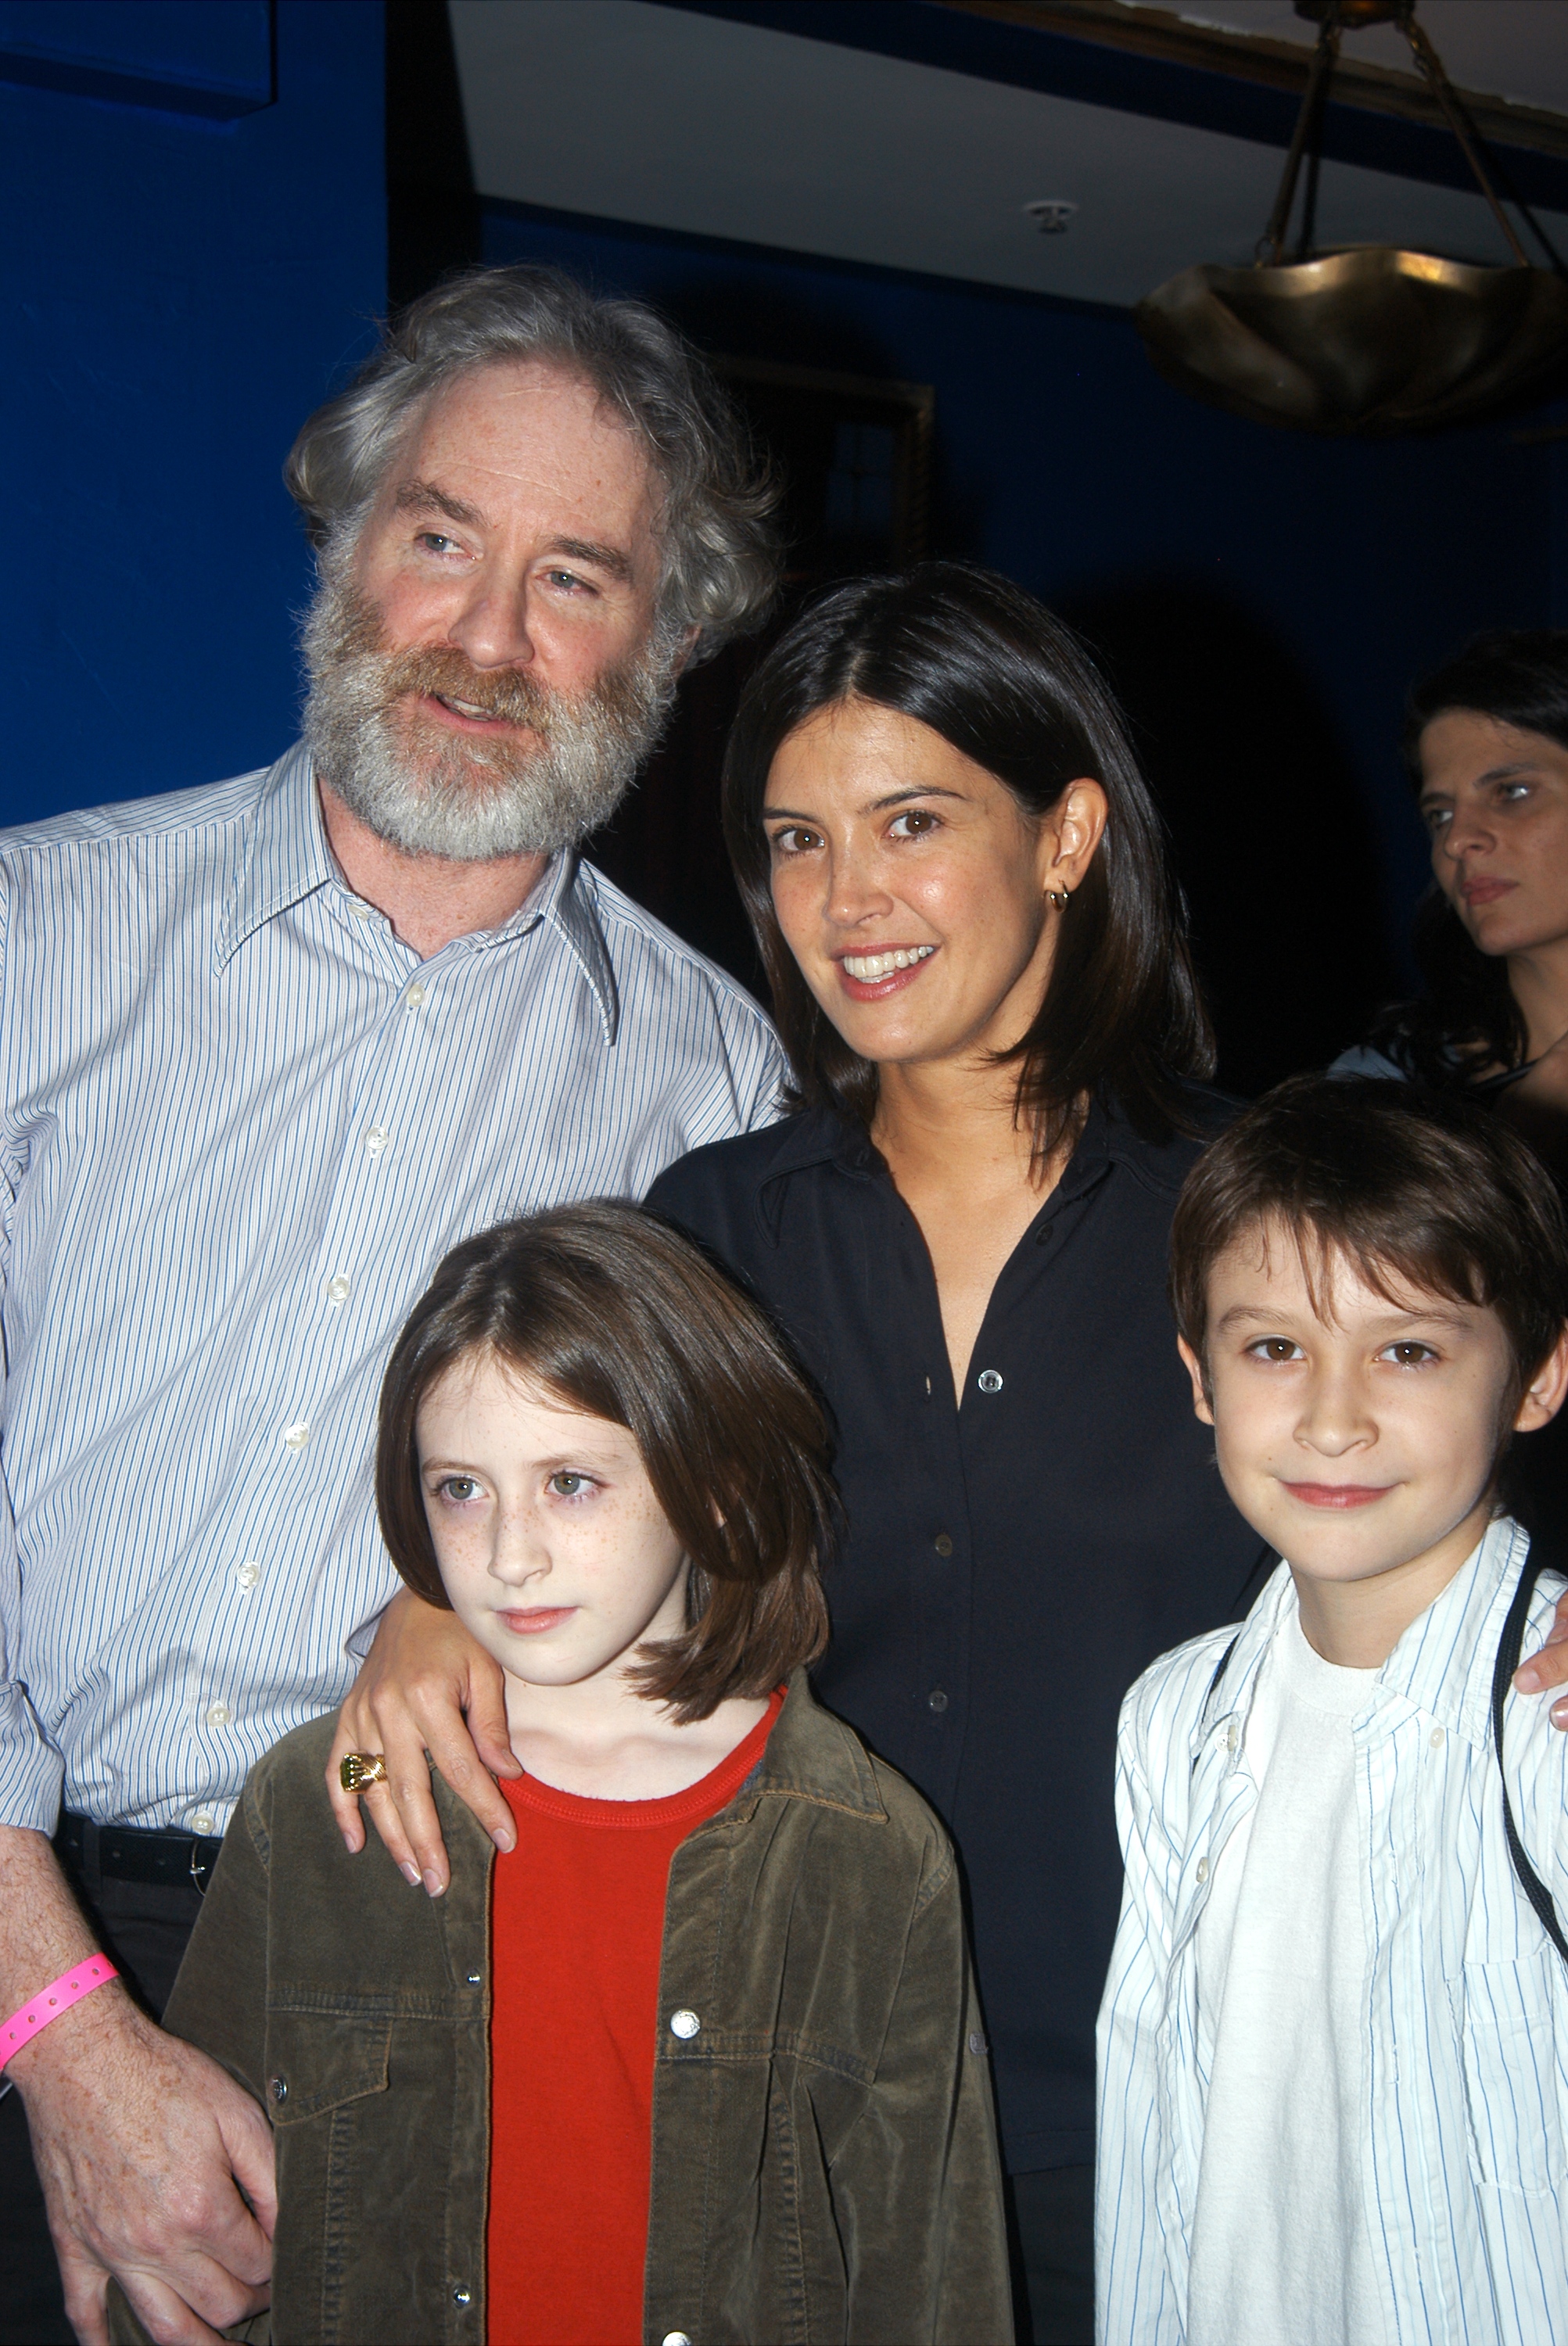 Kevin Kline, wife Phoebe Cates and their kids, Greta (left) and Owen, at the Supper Club on W. 47th St. on September 25, 2003 | Source: Getty Images